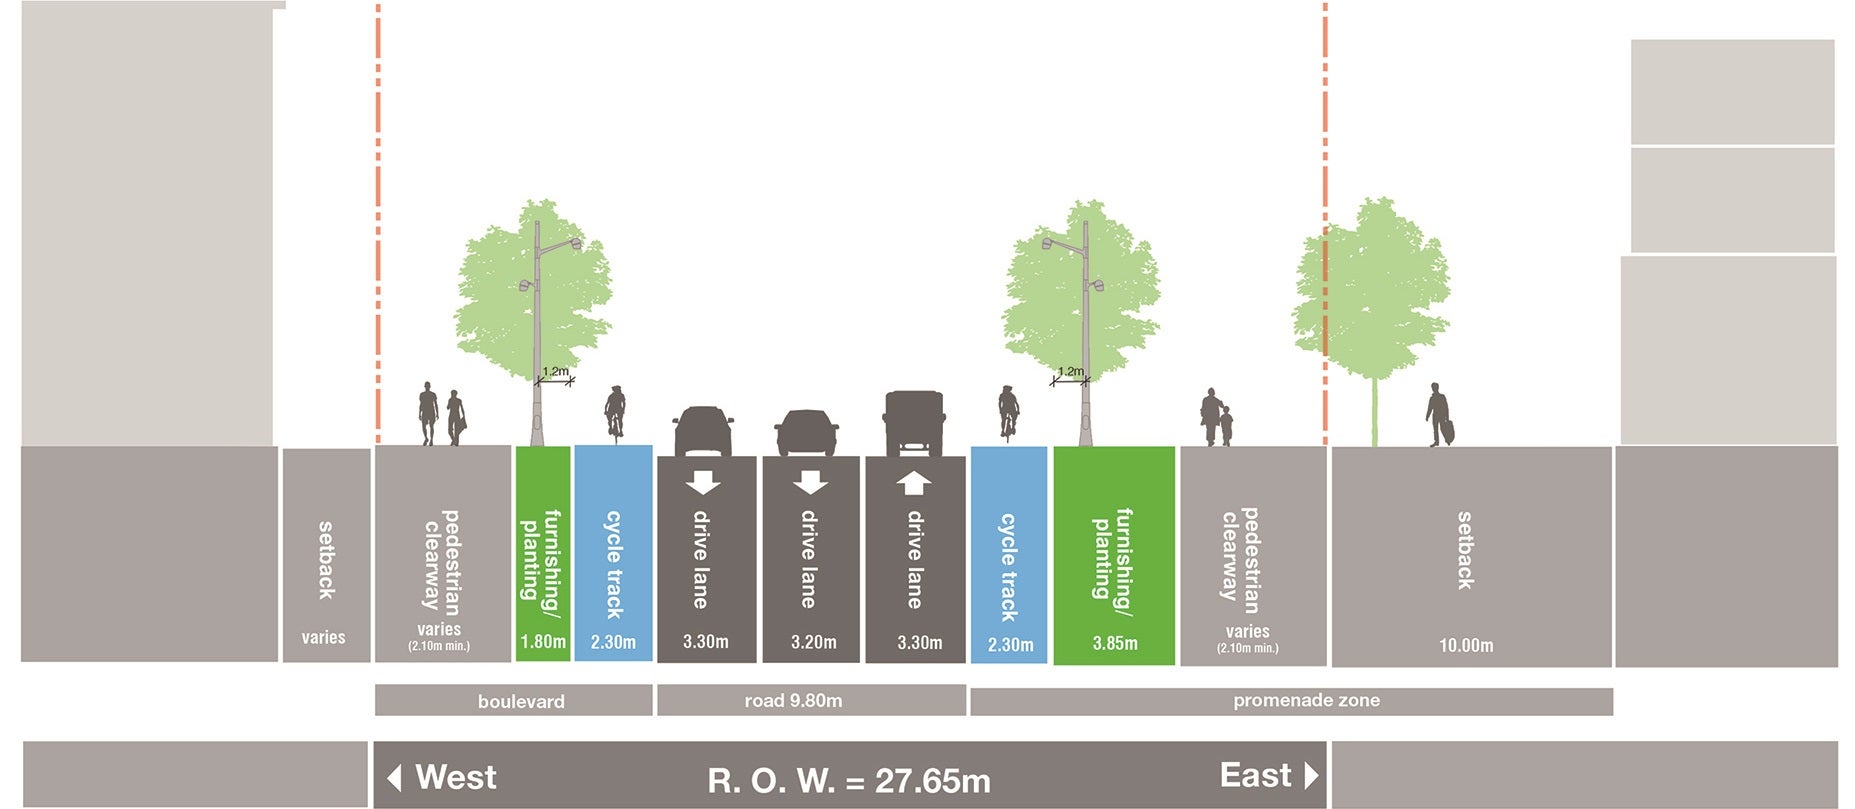 Design plans showing components of a future street.